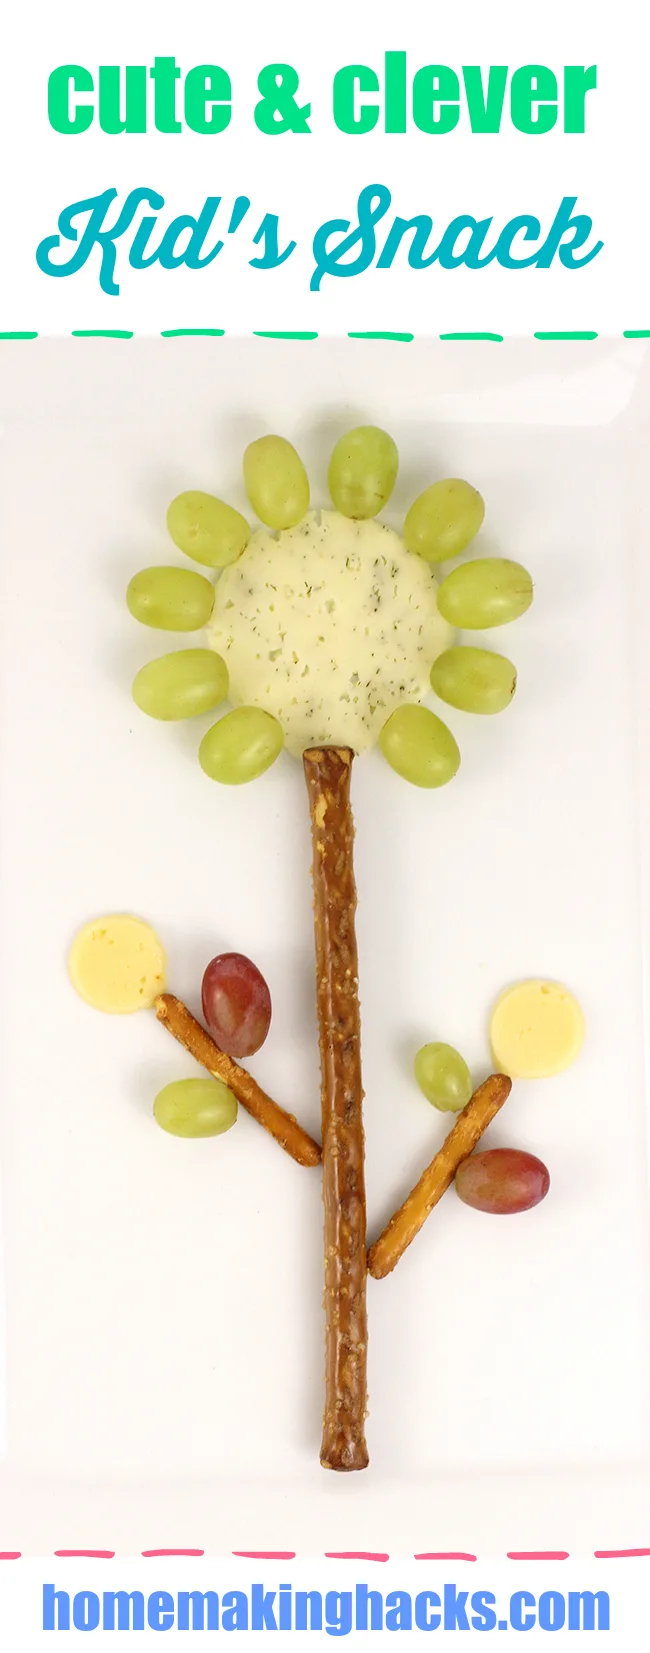 Picky kids? Keep them engaged by getting a little creative with their snacks. Endless ideas with simple ingredients.